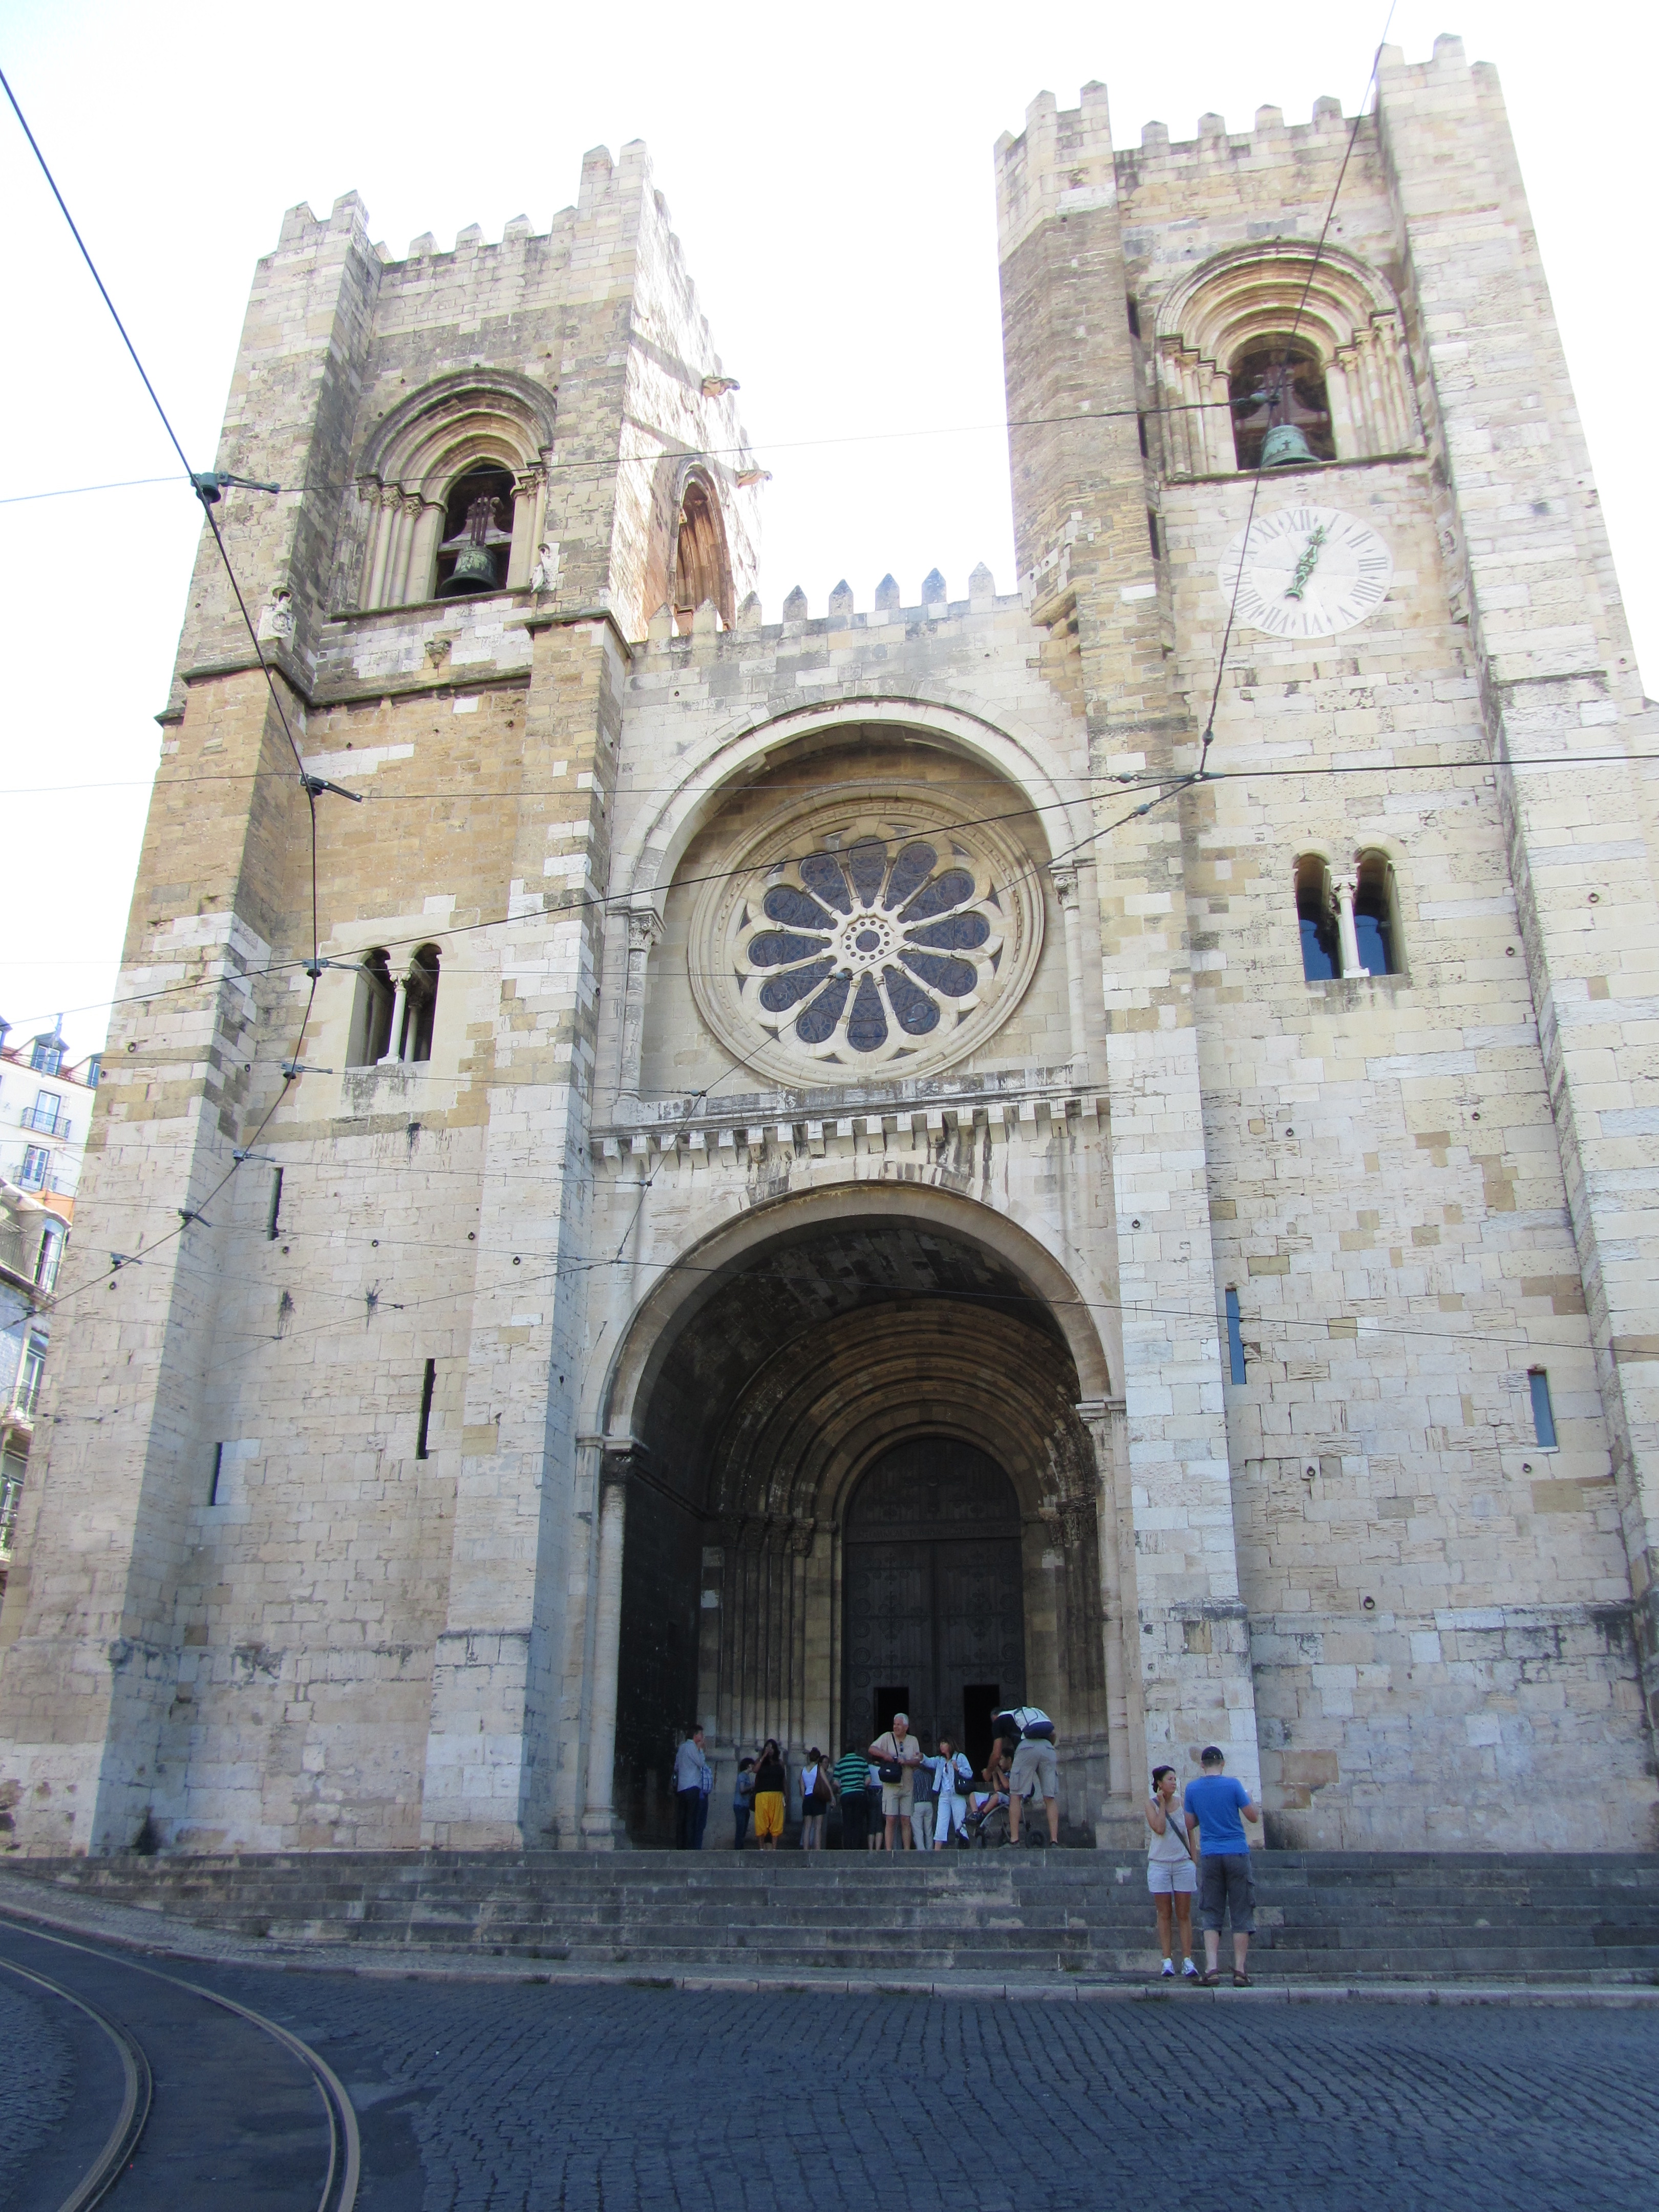 3 FIRST STOP, THE CATHEDRAL, THEN, THE ALFAMA, THE TOWER OF LISBON ...